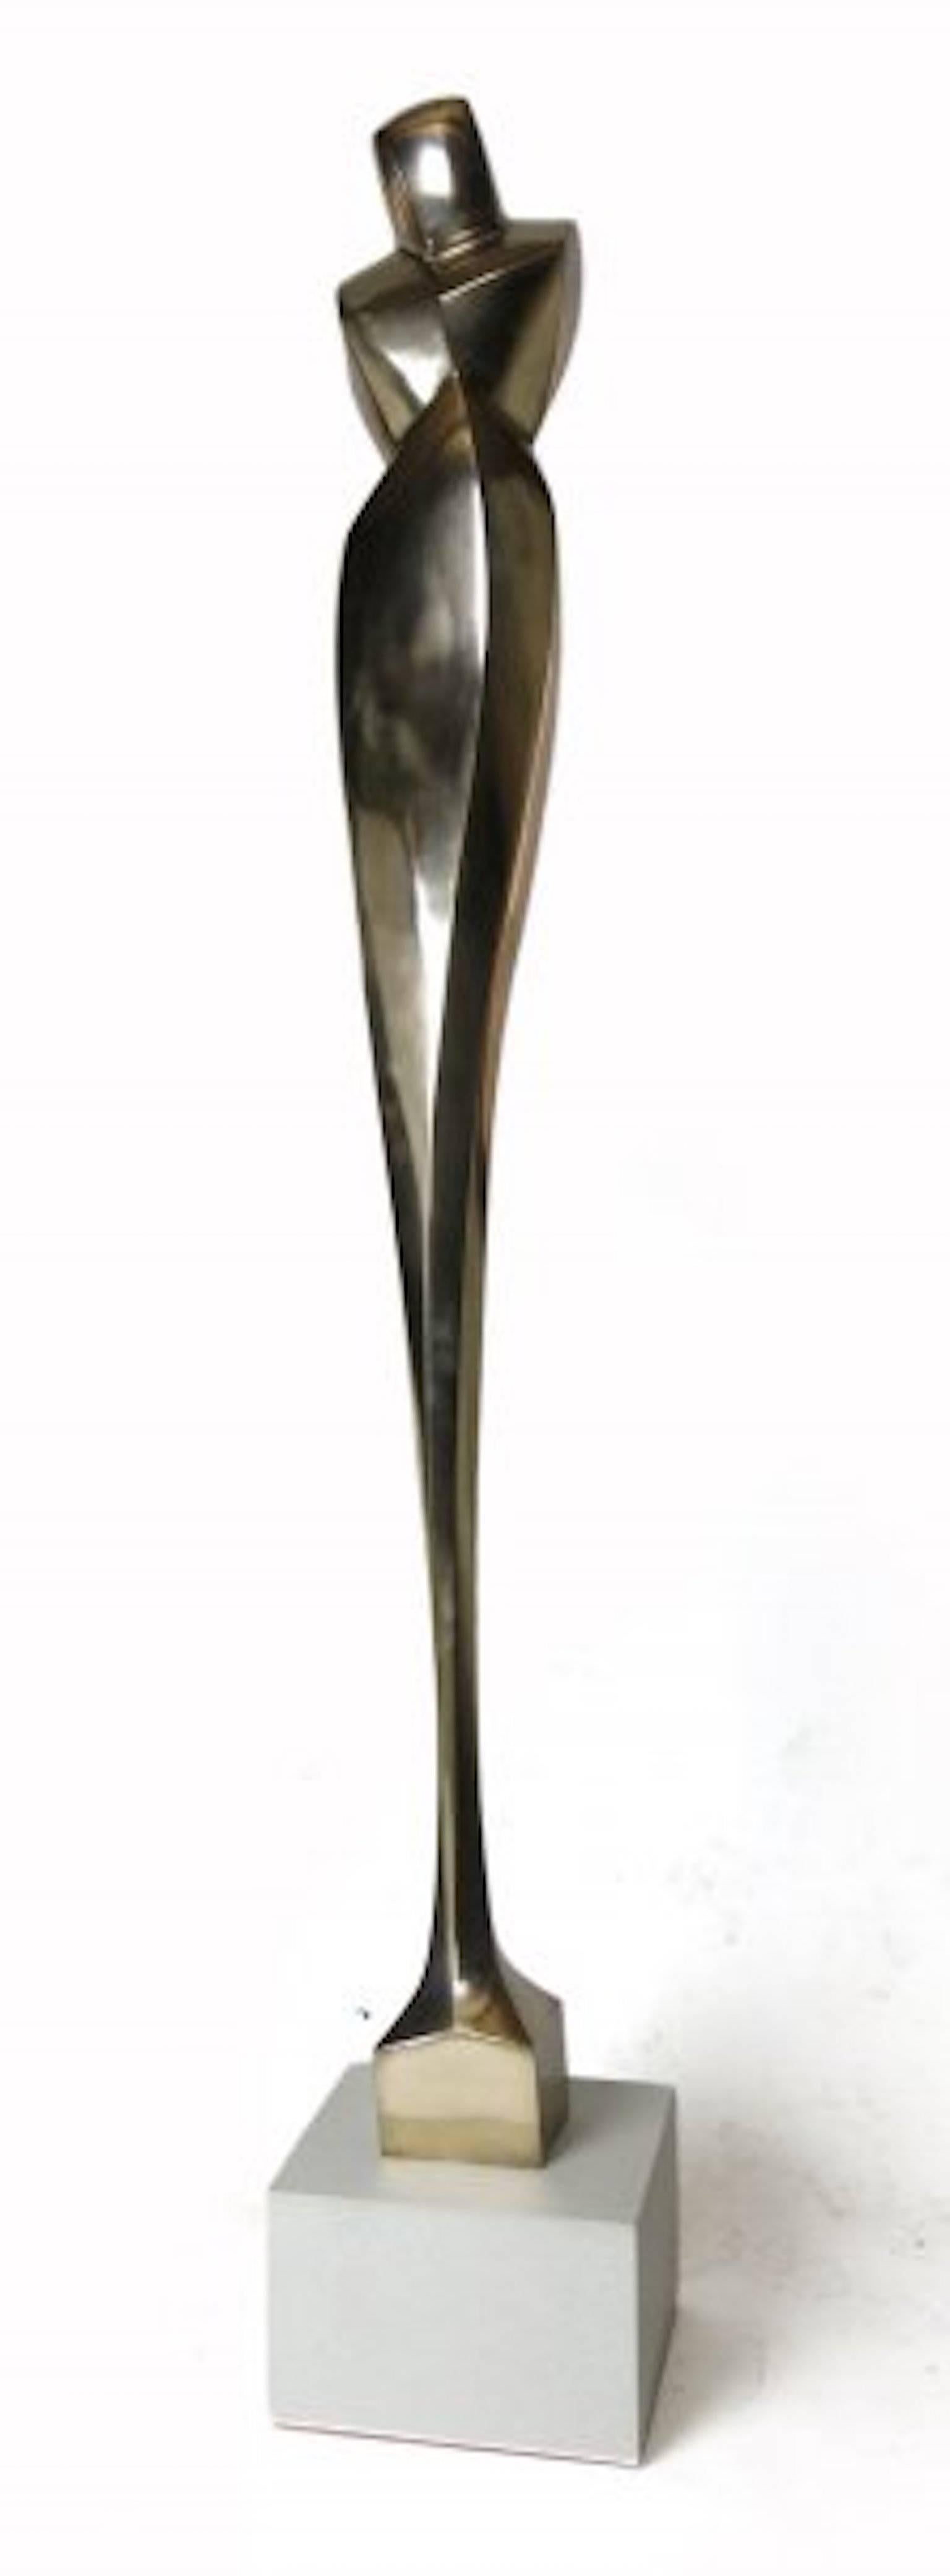 Joel Urruty Abstract Sculpture - Lady In Bronze Polished #4